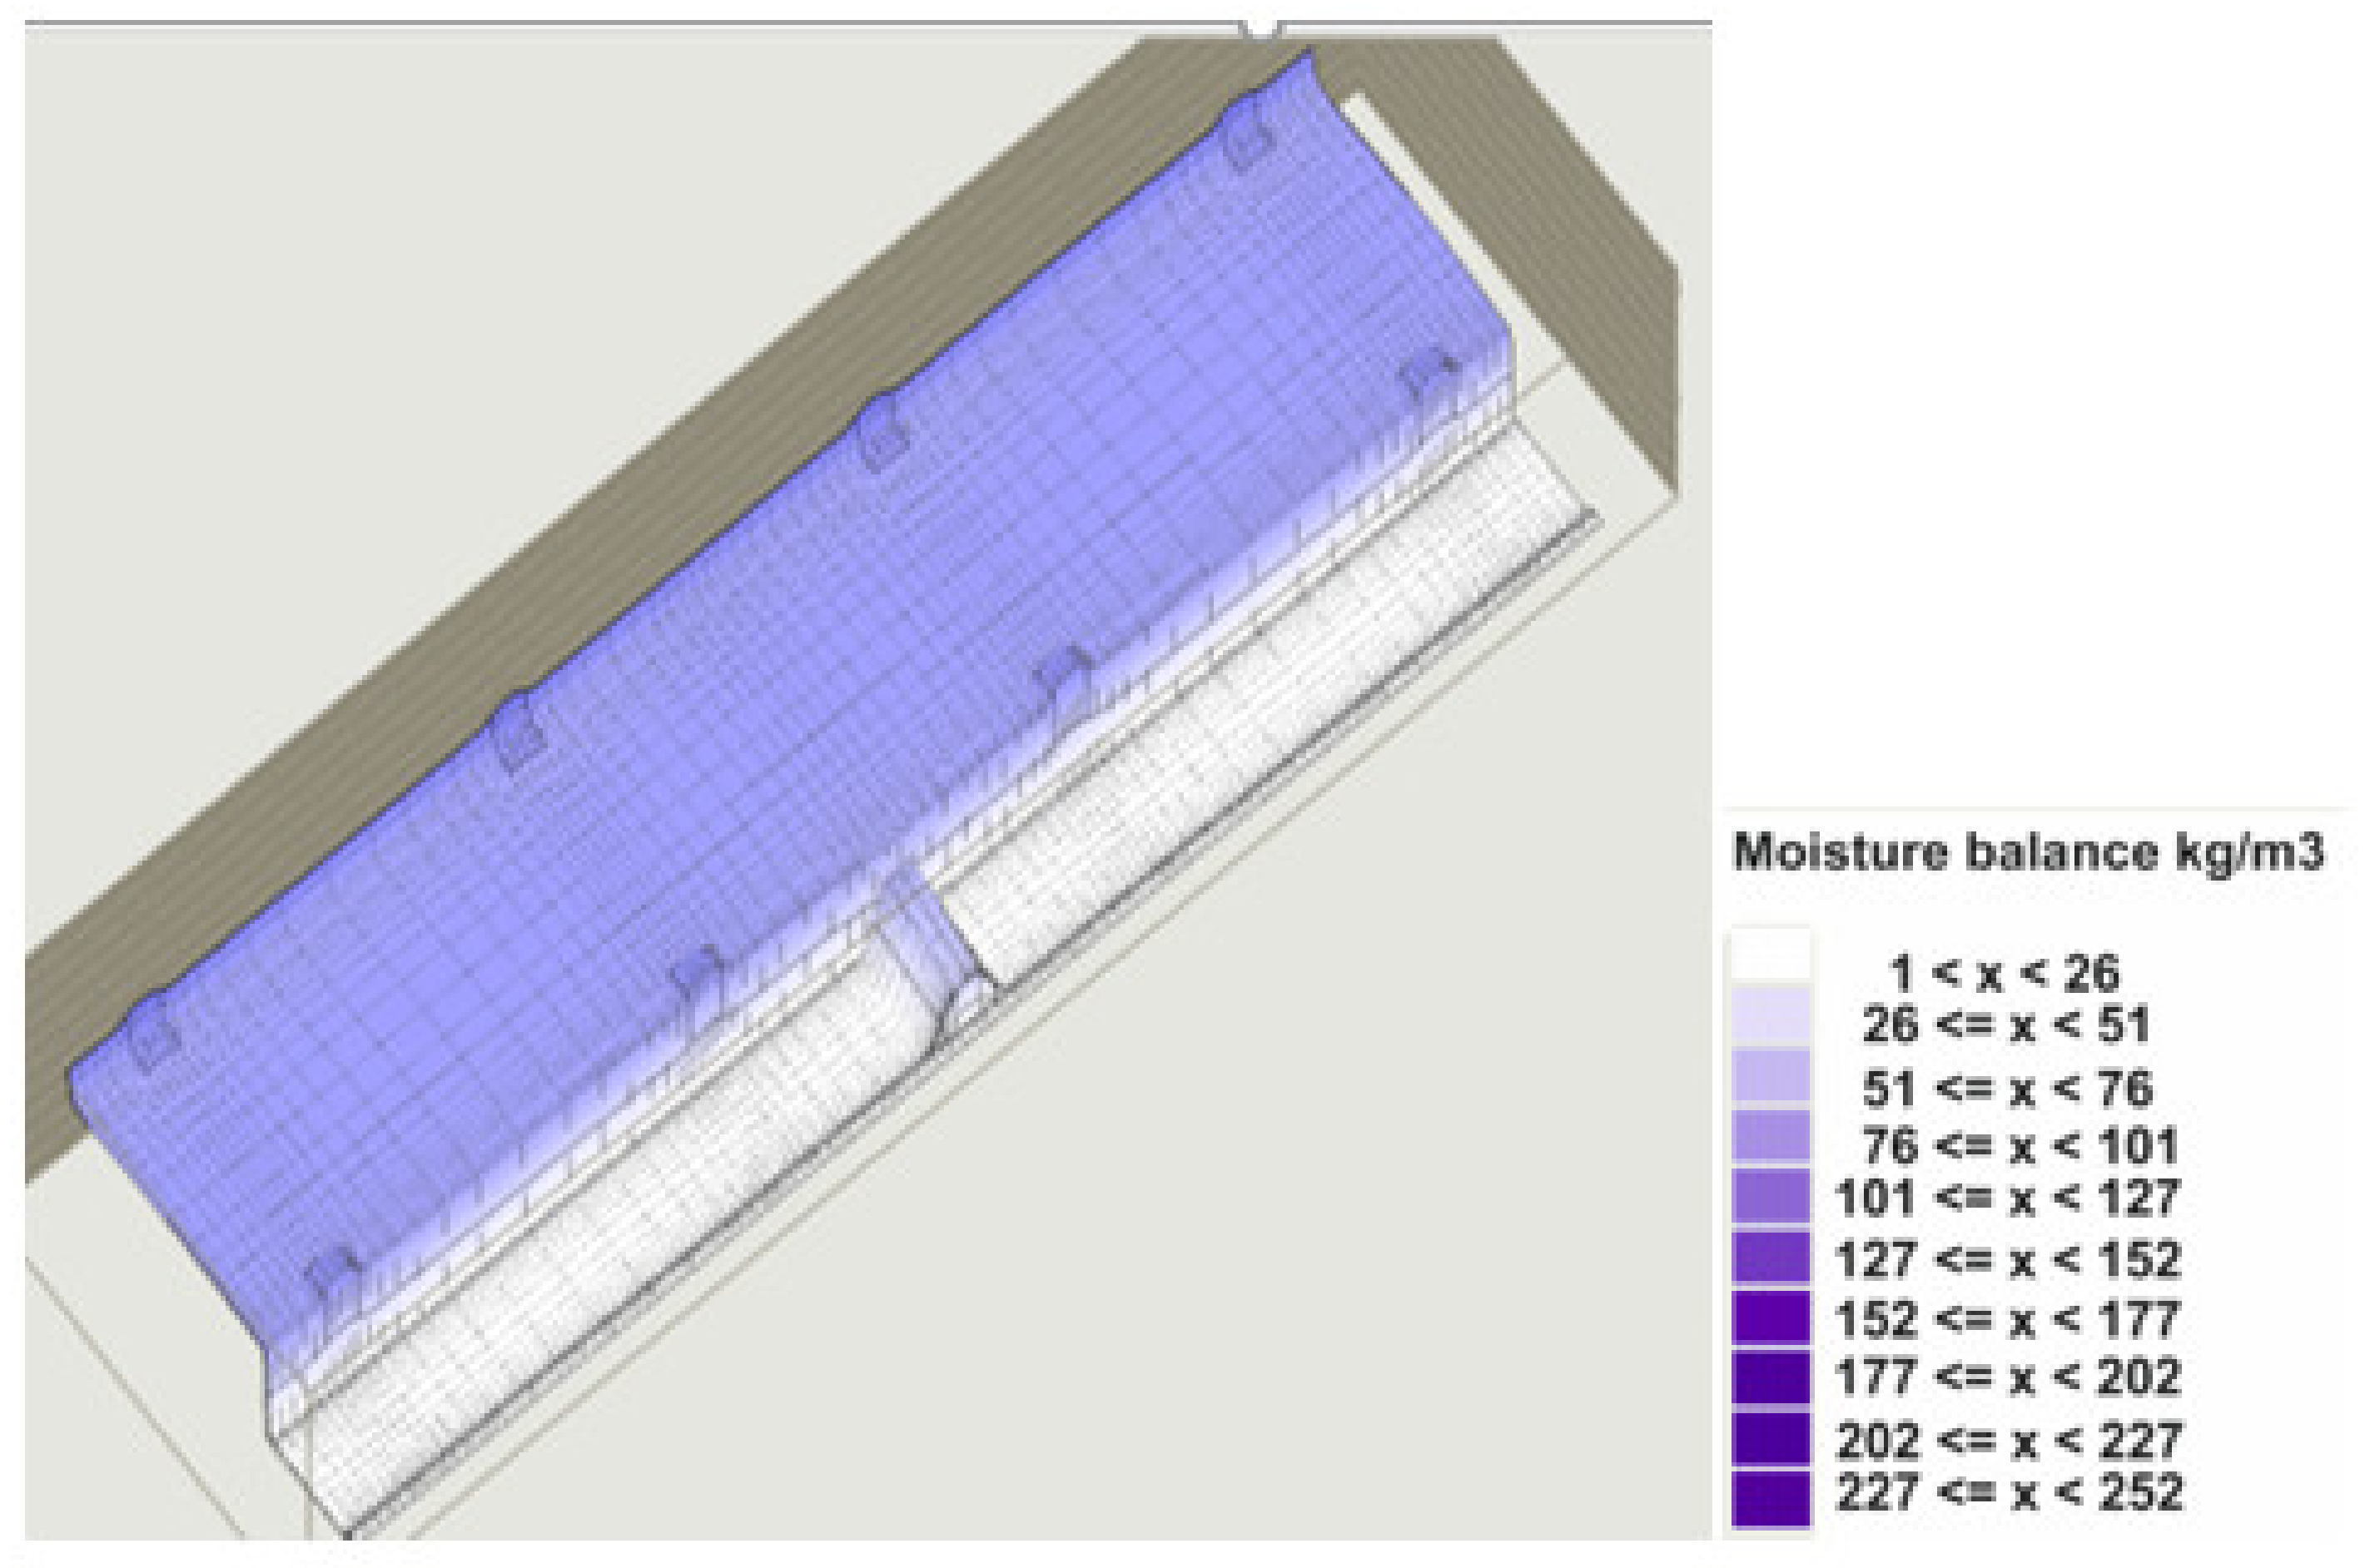 Energies Free Full Text Analysis Of The Thermal Retrofitting Potential Of The External Walls Of Podhale S Historical Timber Buildings In The Aspect Of The Non Deterioration Of Their Technical Condition Html